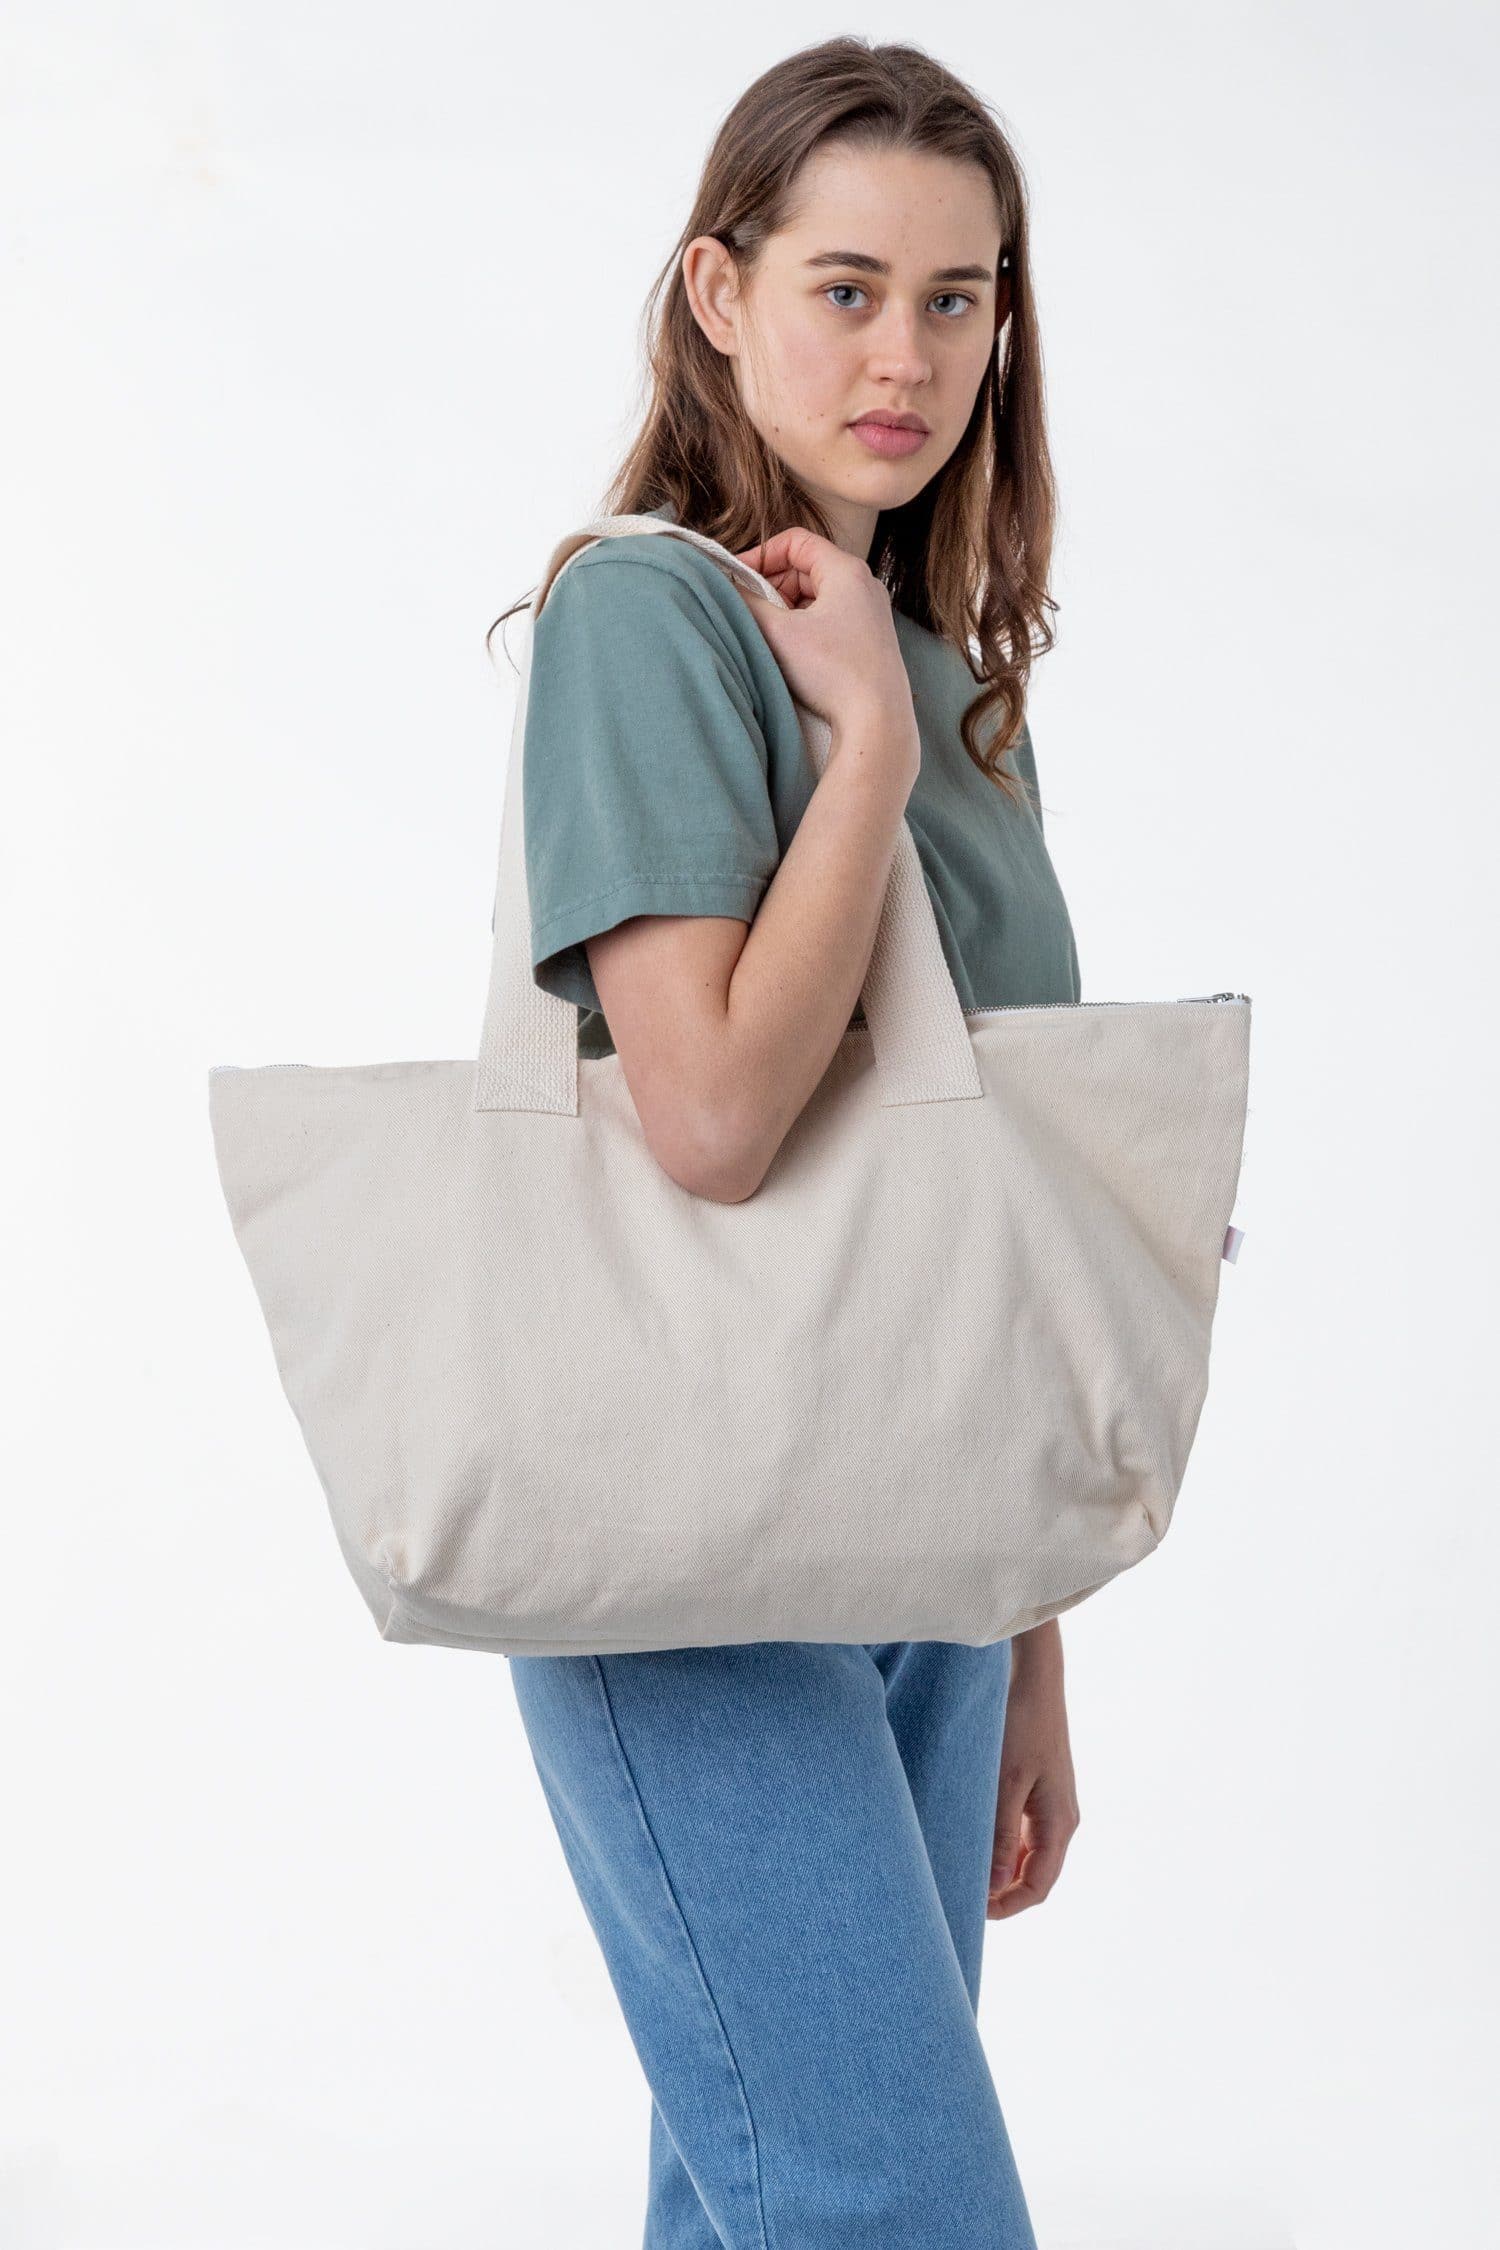 Los Angeles Apparel | Carry All Zip Tote in Light Pink